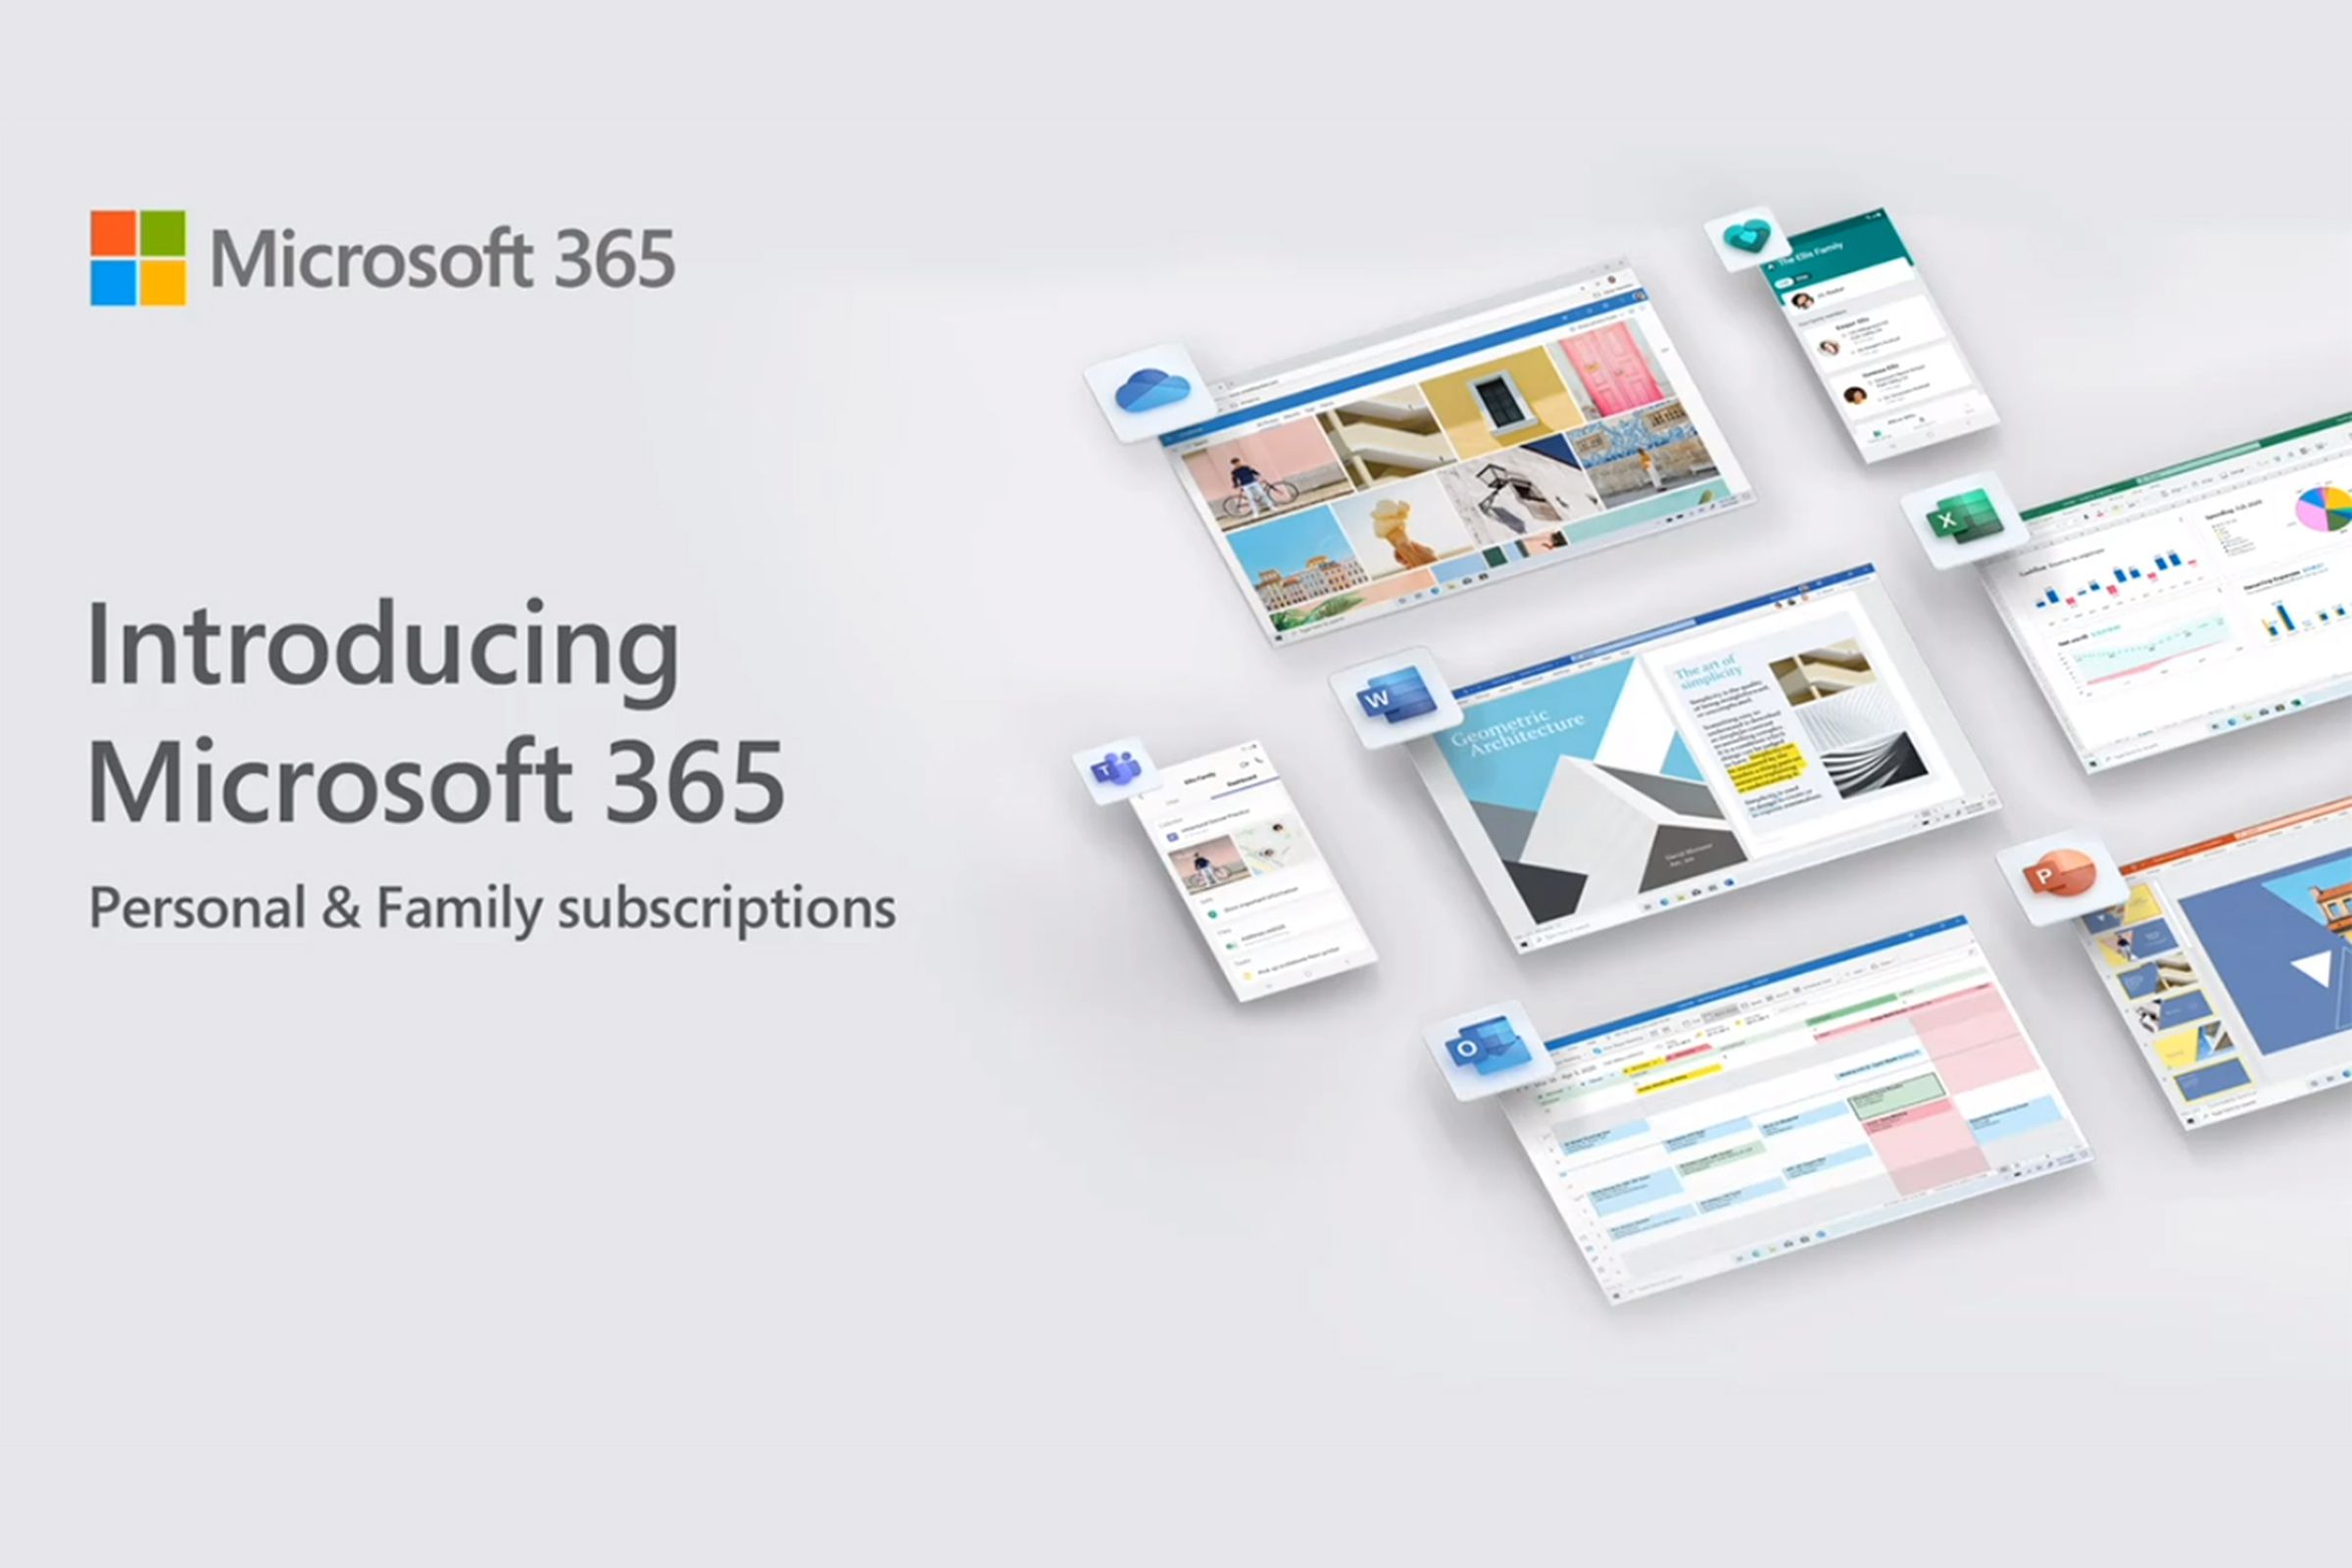 Microsoft 365 keeps growing on the consumer side.